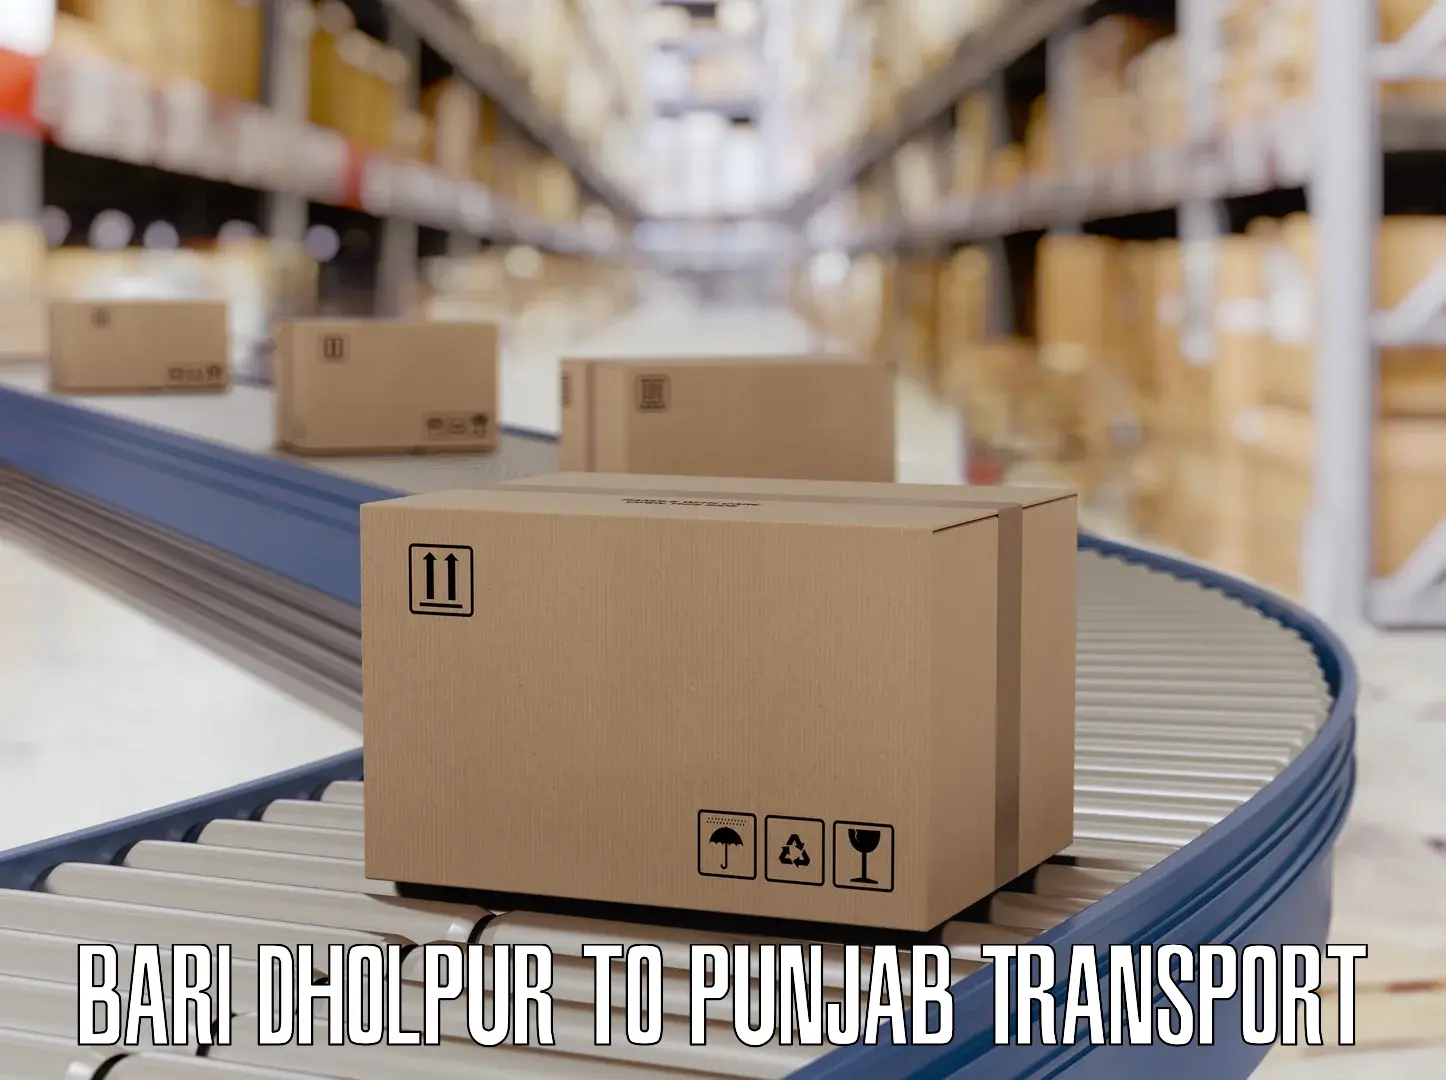 Daily parcel service transport in Bari Dholpur to Punjab Agricultural University Ludhiana